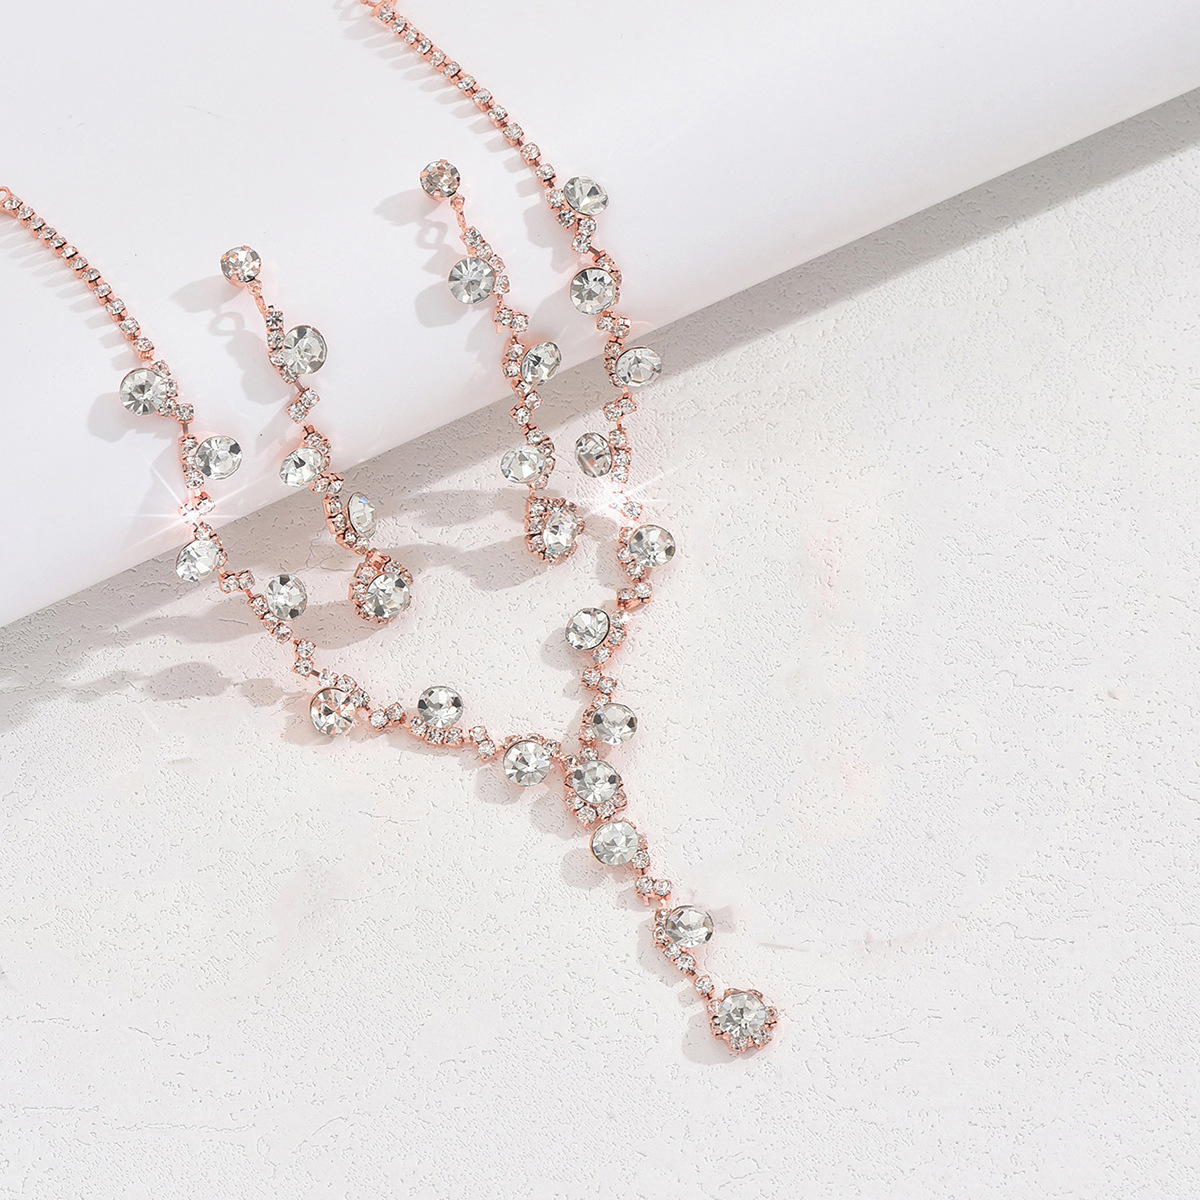 869 Necklace earrings rose gold set